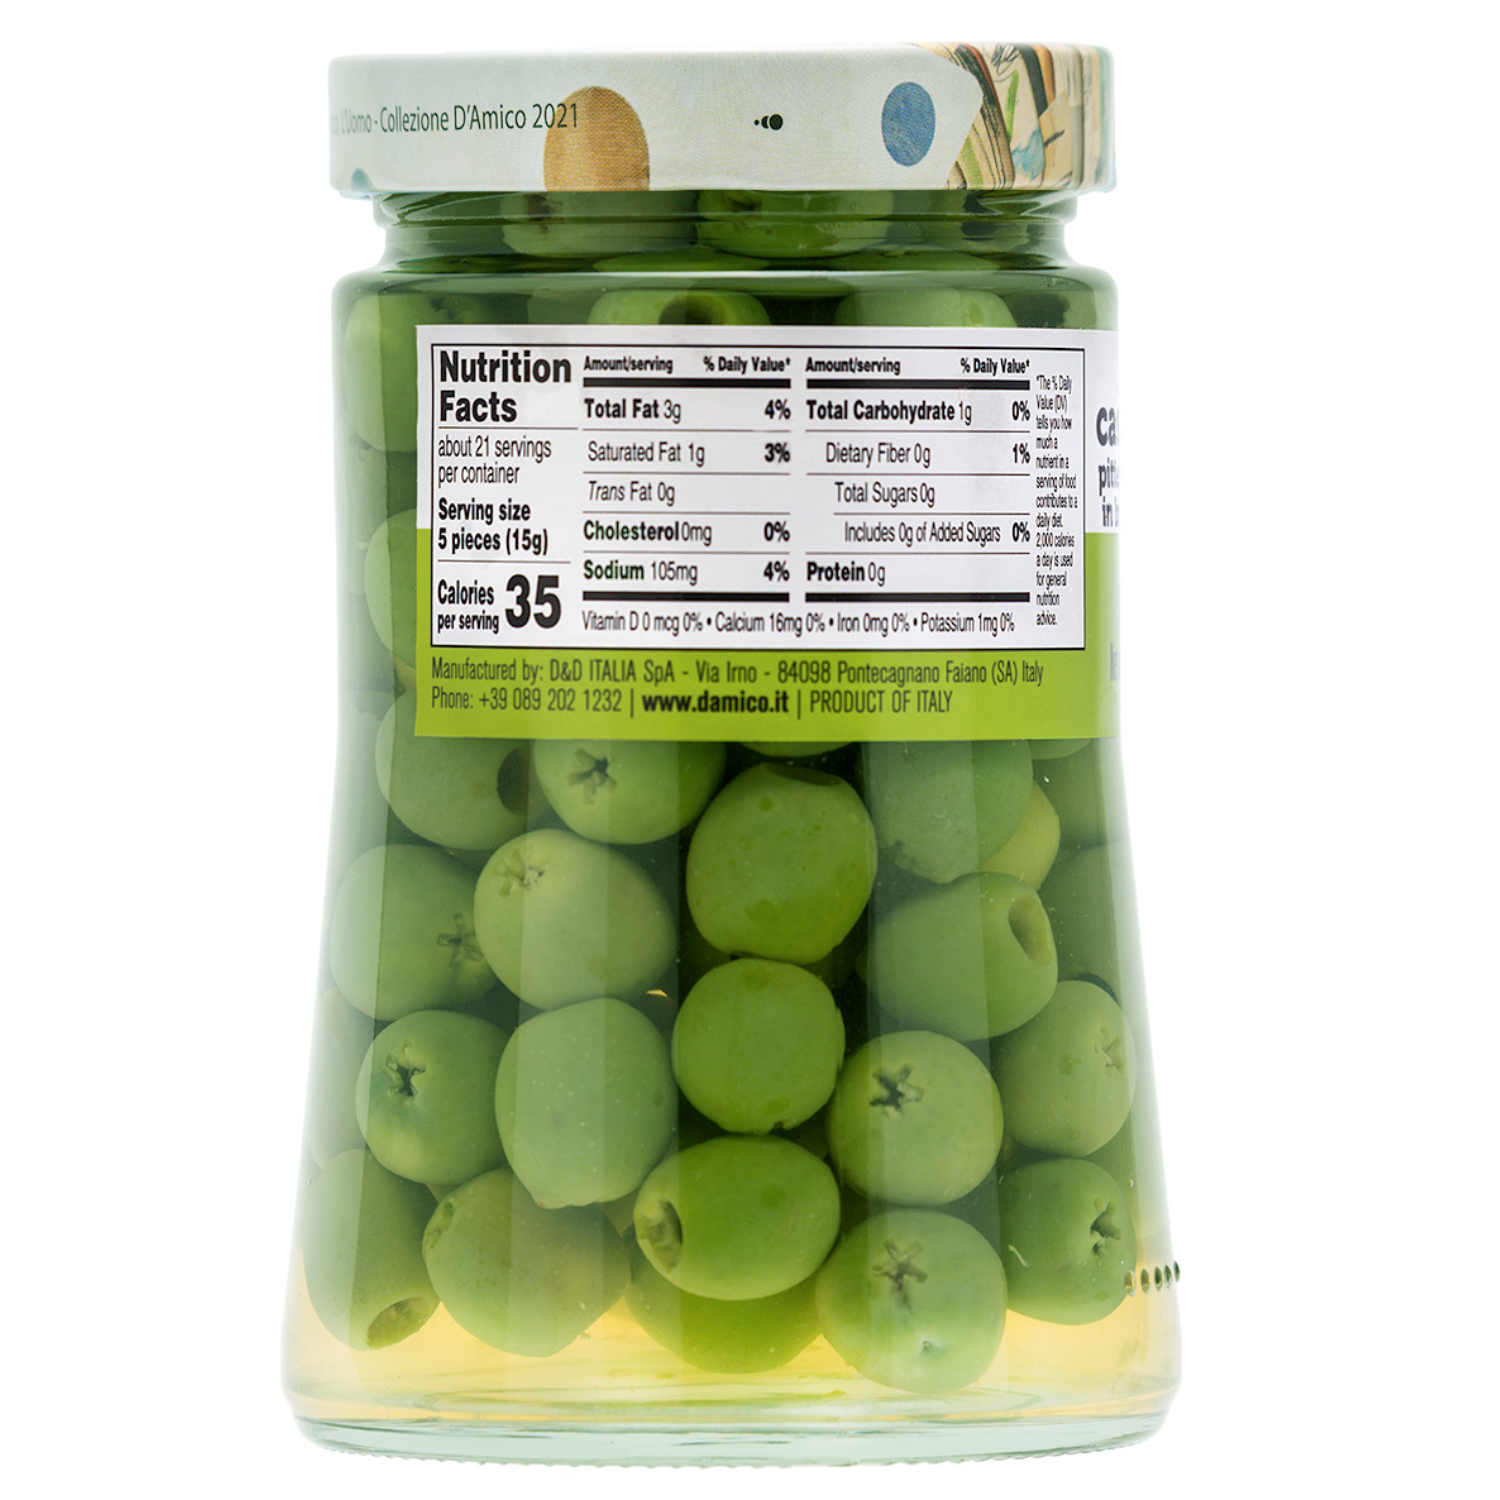 Fratelli D'Amico, Castelvetrano Olives, Pitted, Sicilian Green Olives, Olive Pitted, 24 oz (700g)